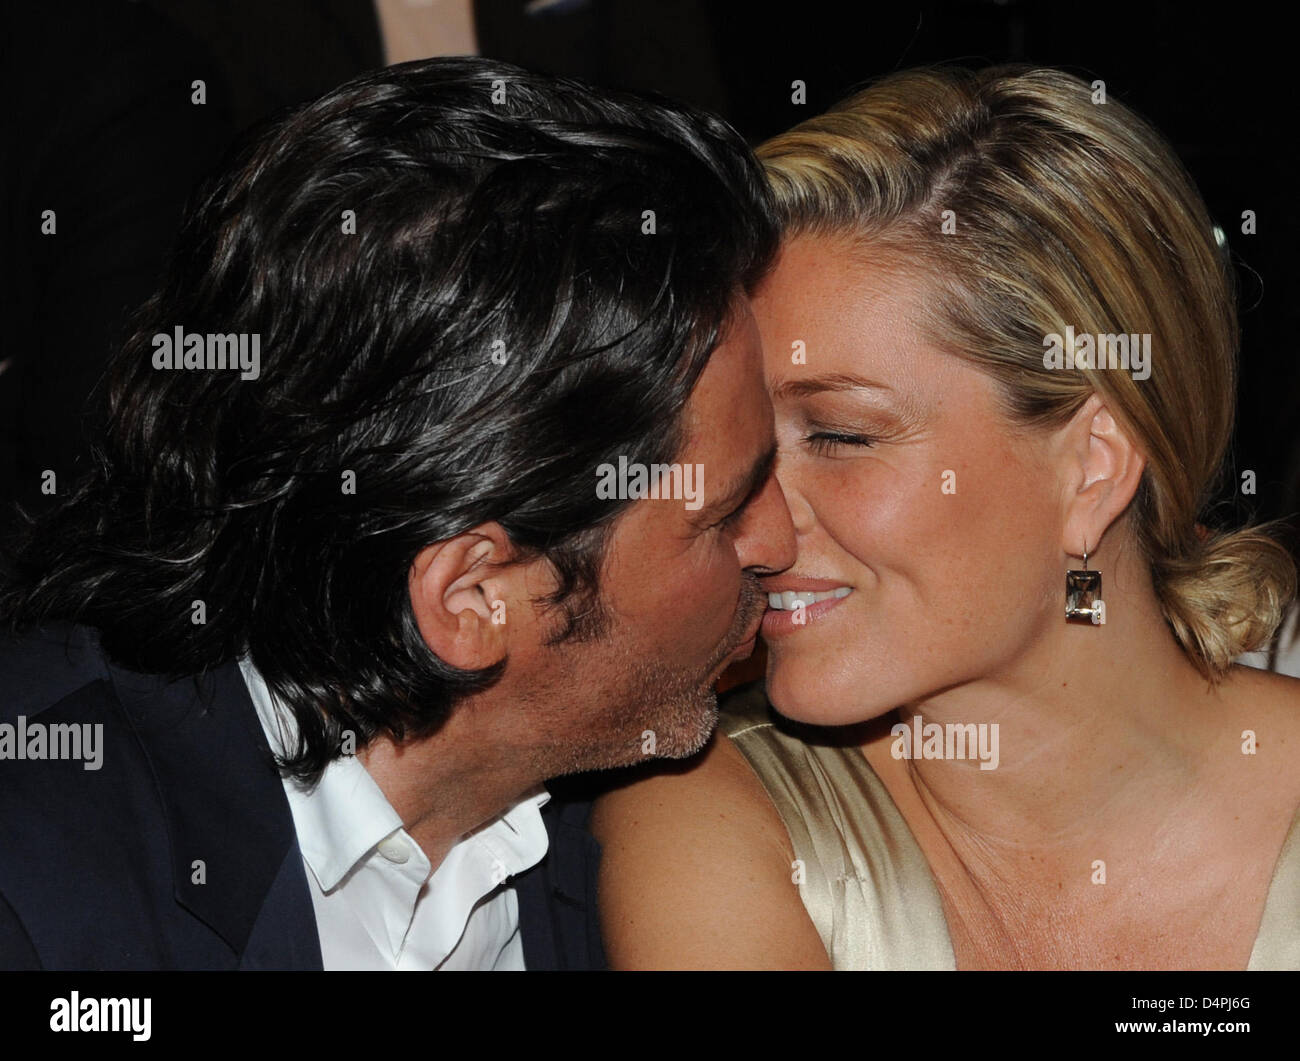 Singer Thomas Anders and his wife Claudia Weidung-Anders kiss during the  presentation of the label ?Gant? at the Mercedes-Benz Fashion Week in  Berlin, Germany, 01 July 2009. Spring/Summer 2010 fashion trends are